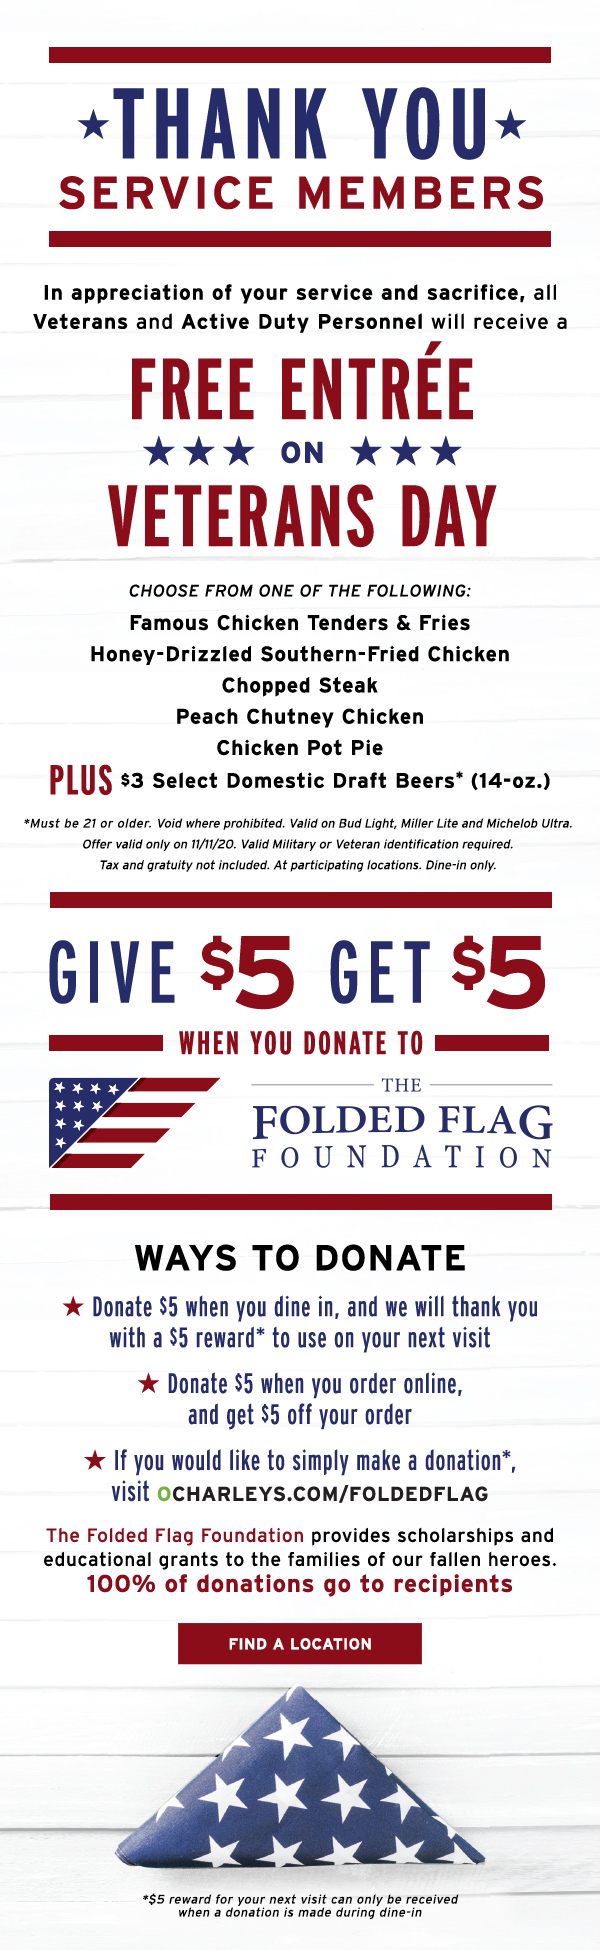 Free Meals for Veterans Day Senior Daily